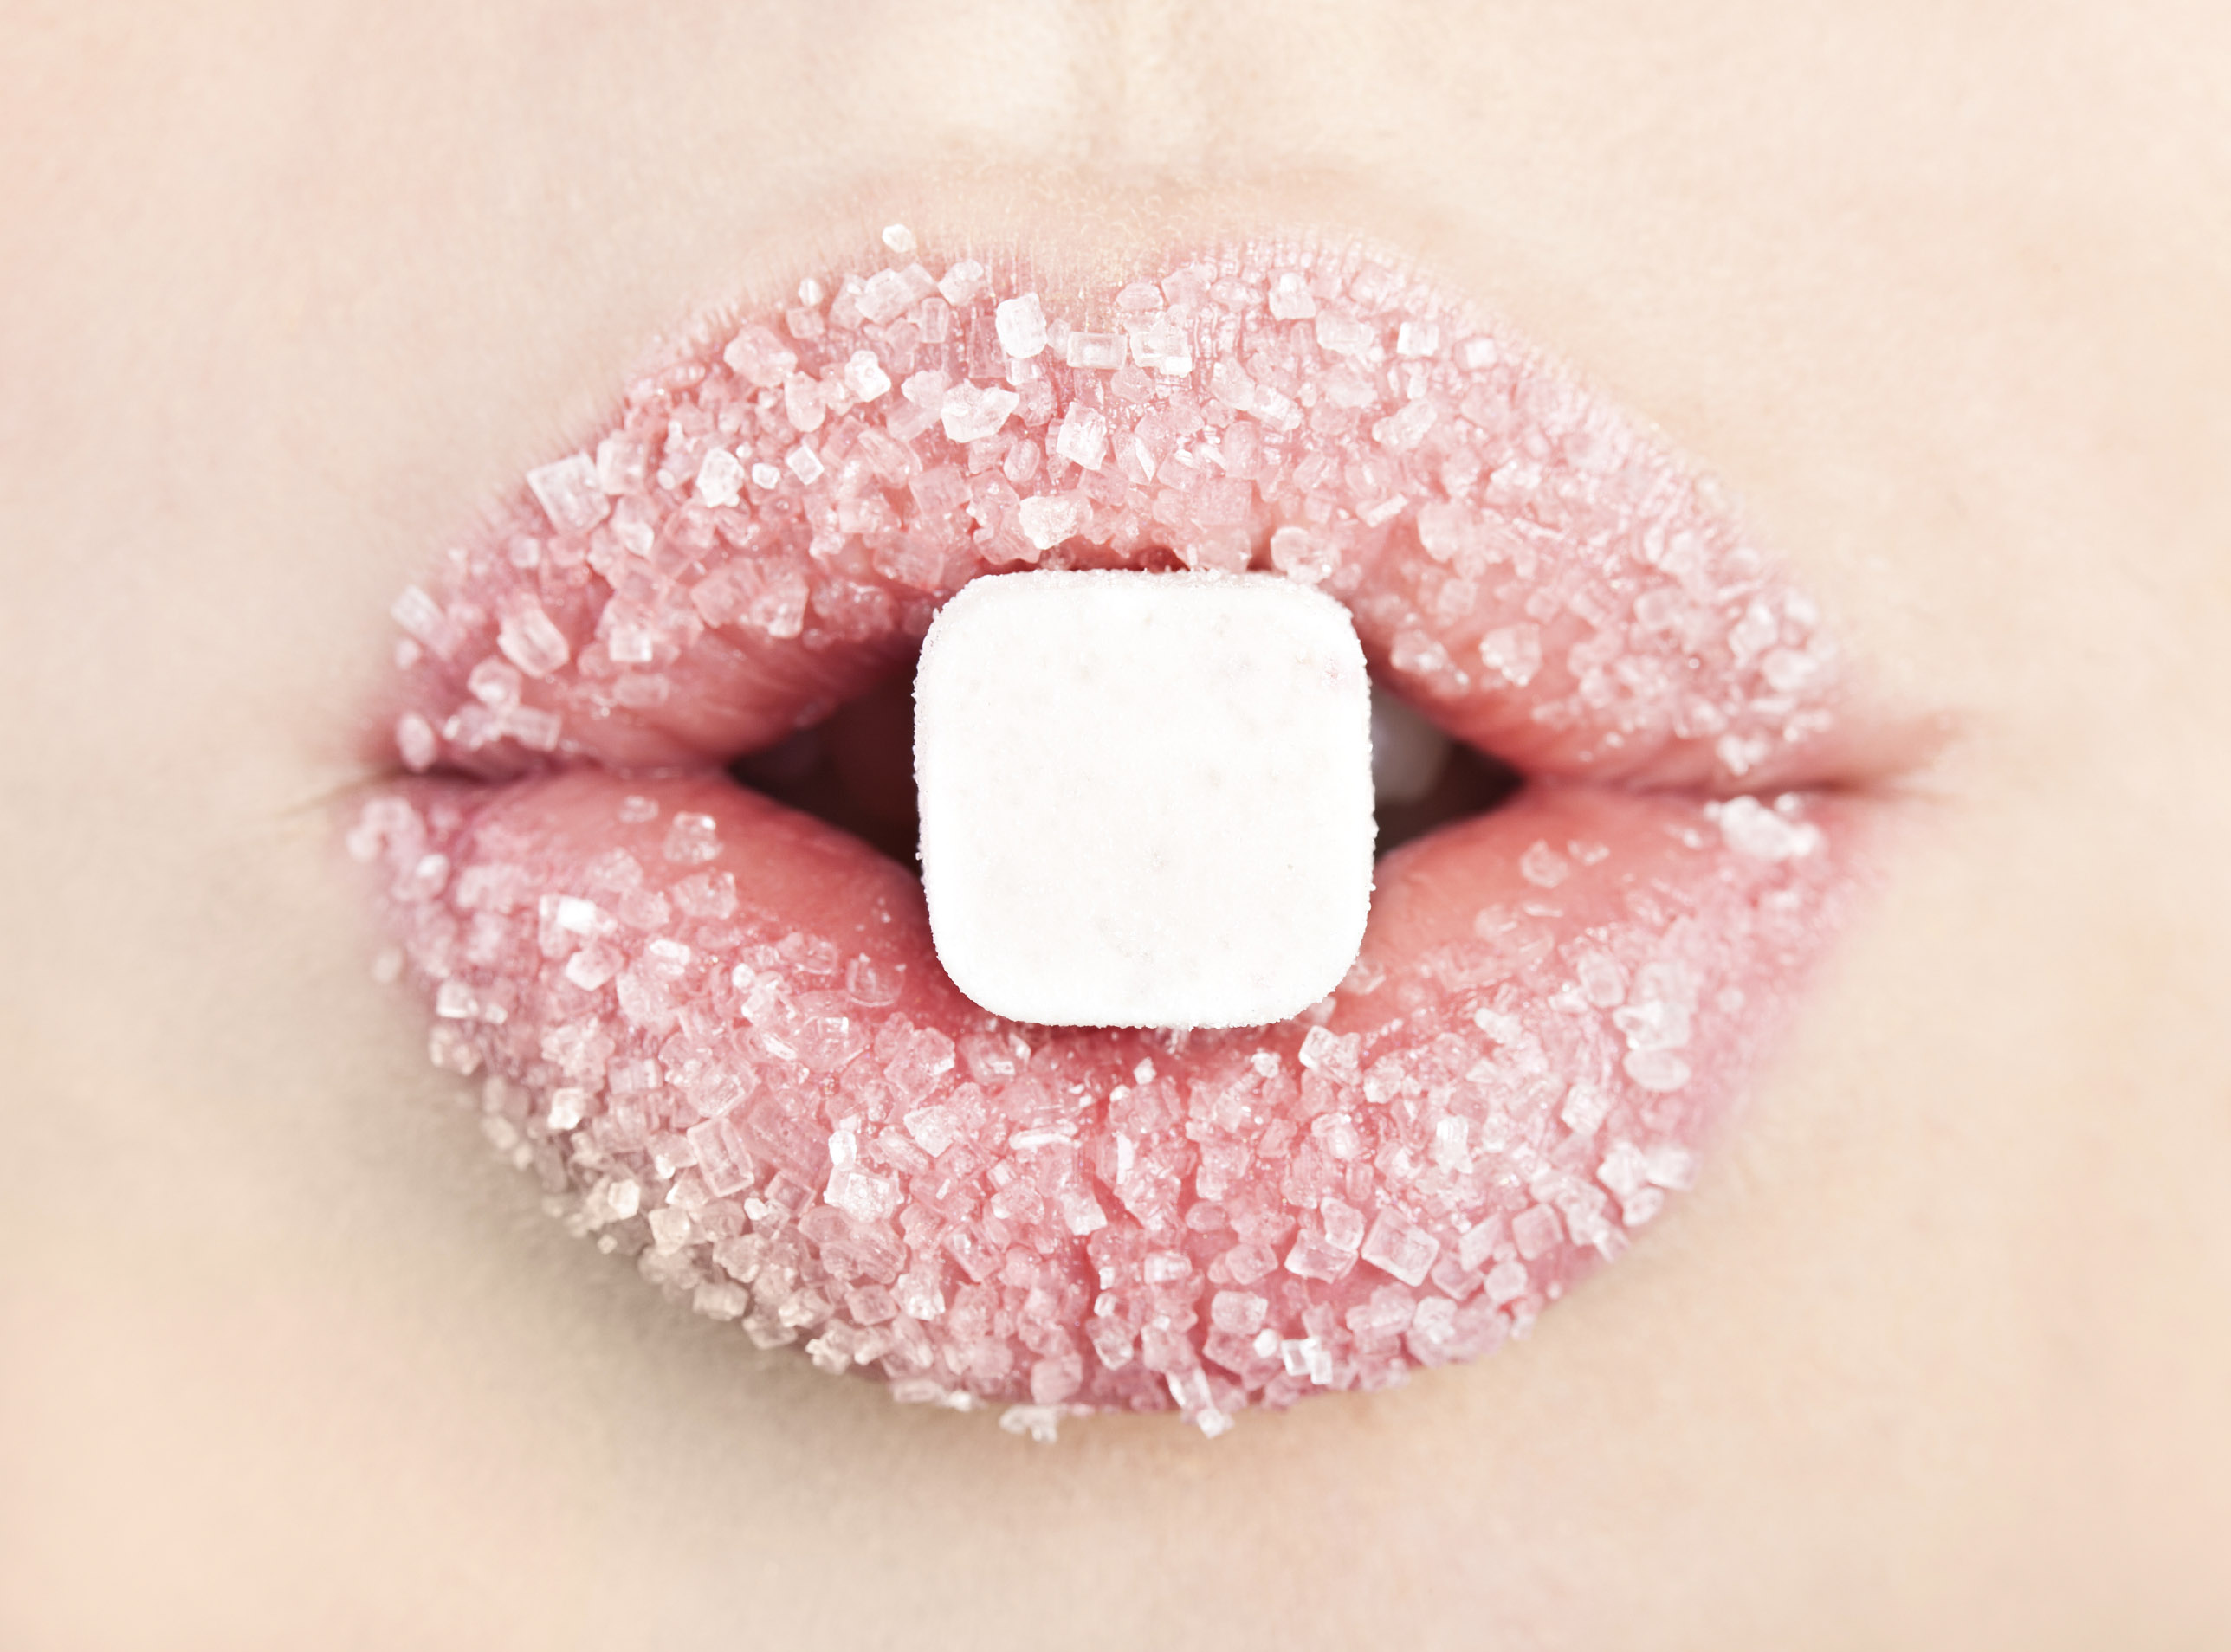 How Sugar Affects your Brain